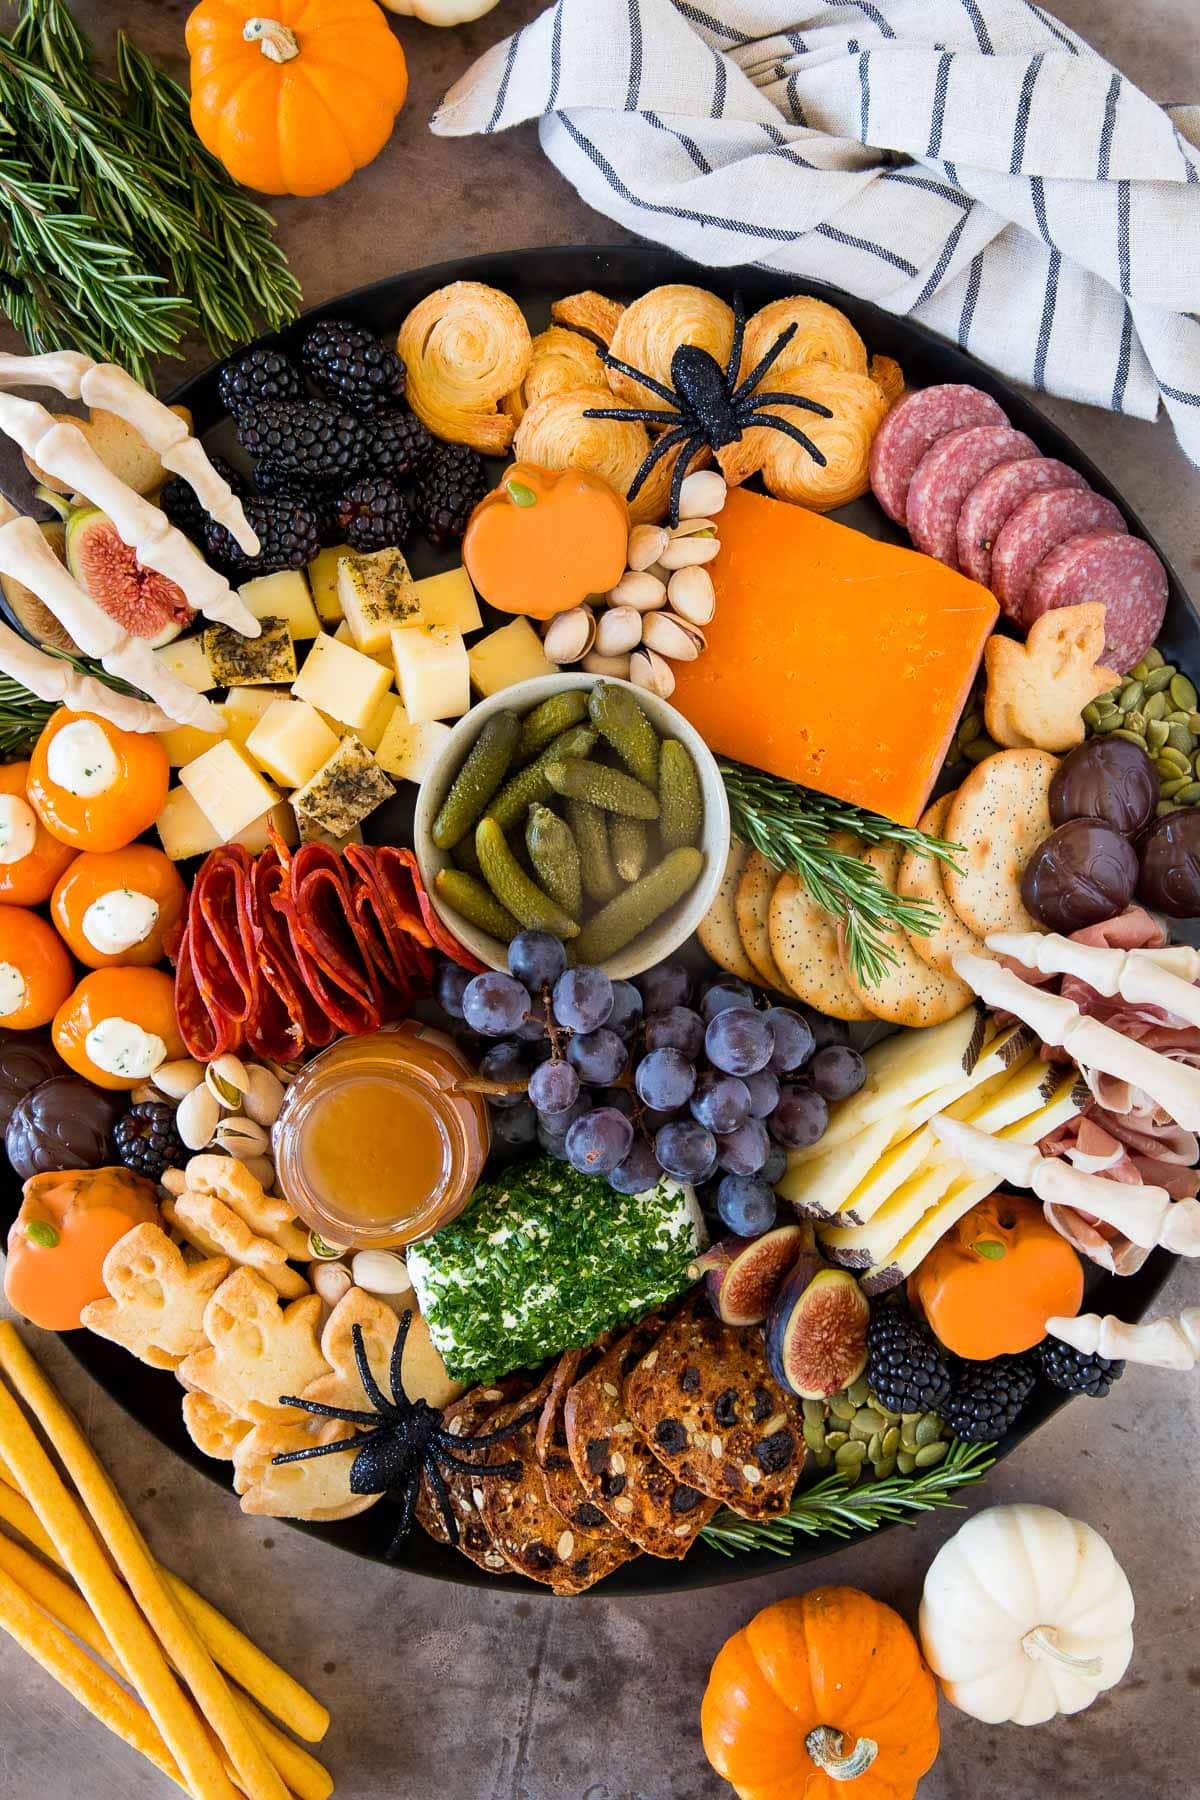 A Halloween charcuterie board filled with meats, cheeses, crackers and Halloween sweets.